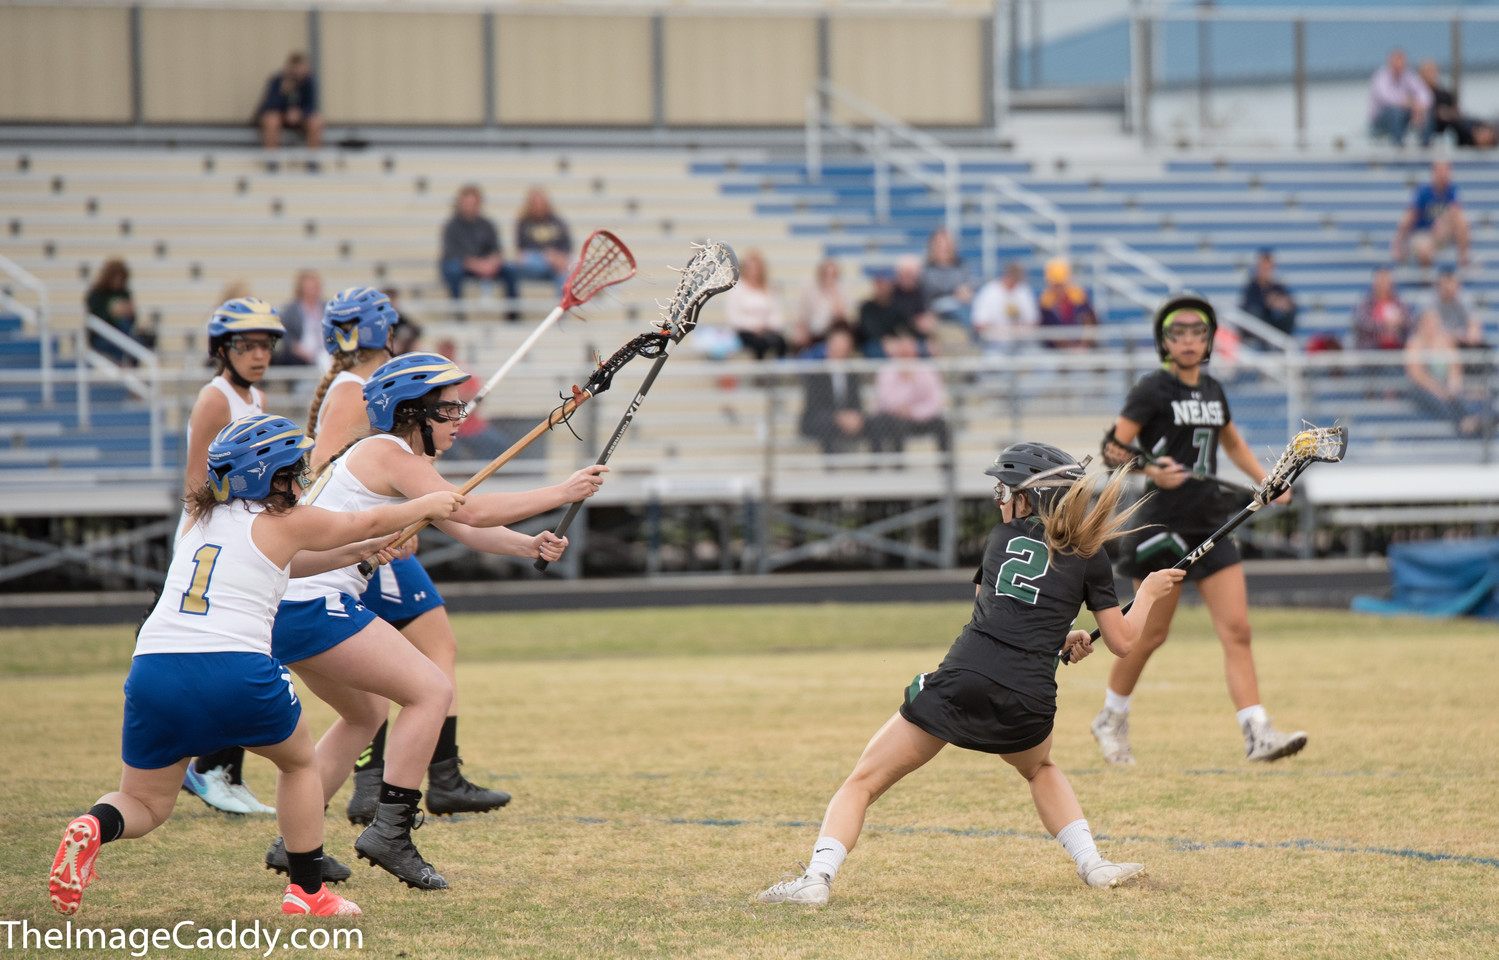 Nease’s Erin Cotter (2)  controls the ball during the Panthers’ 16-2 win over Menendez on Tuesday, March 6.